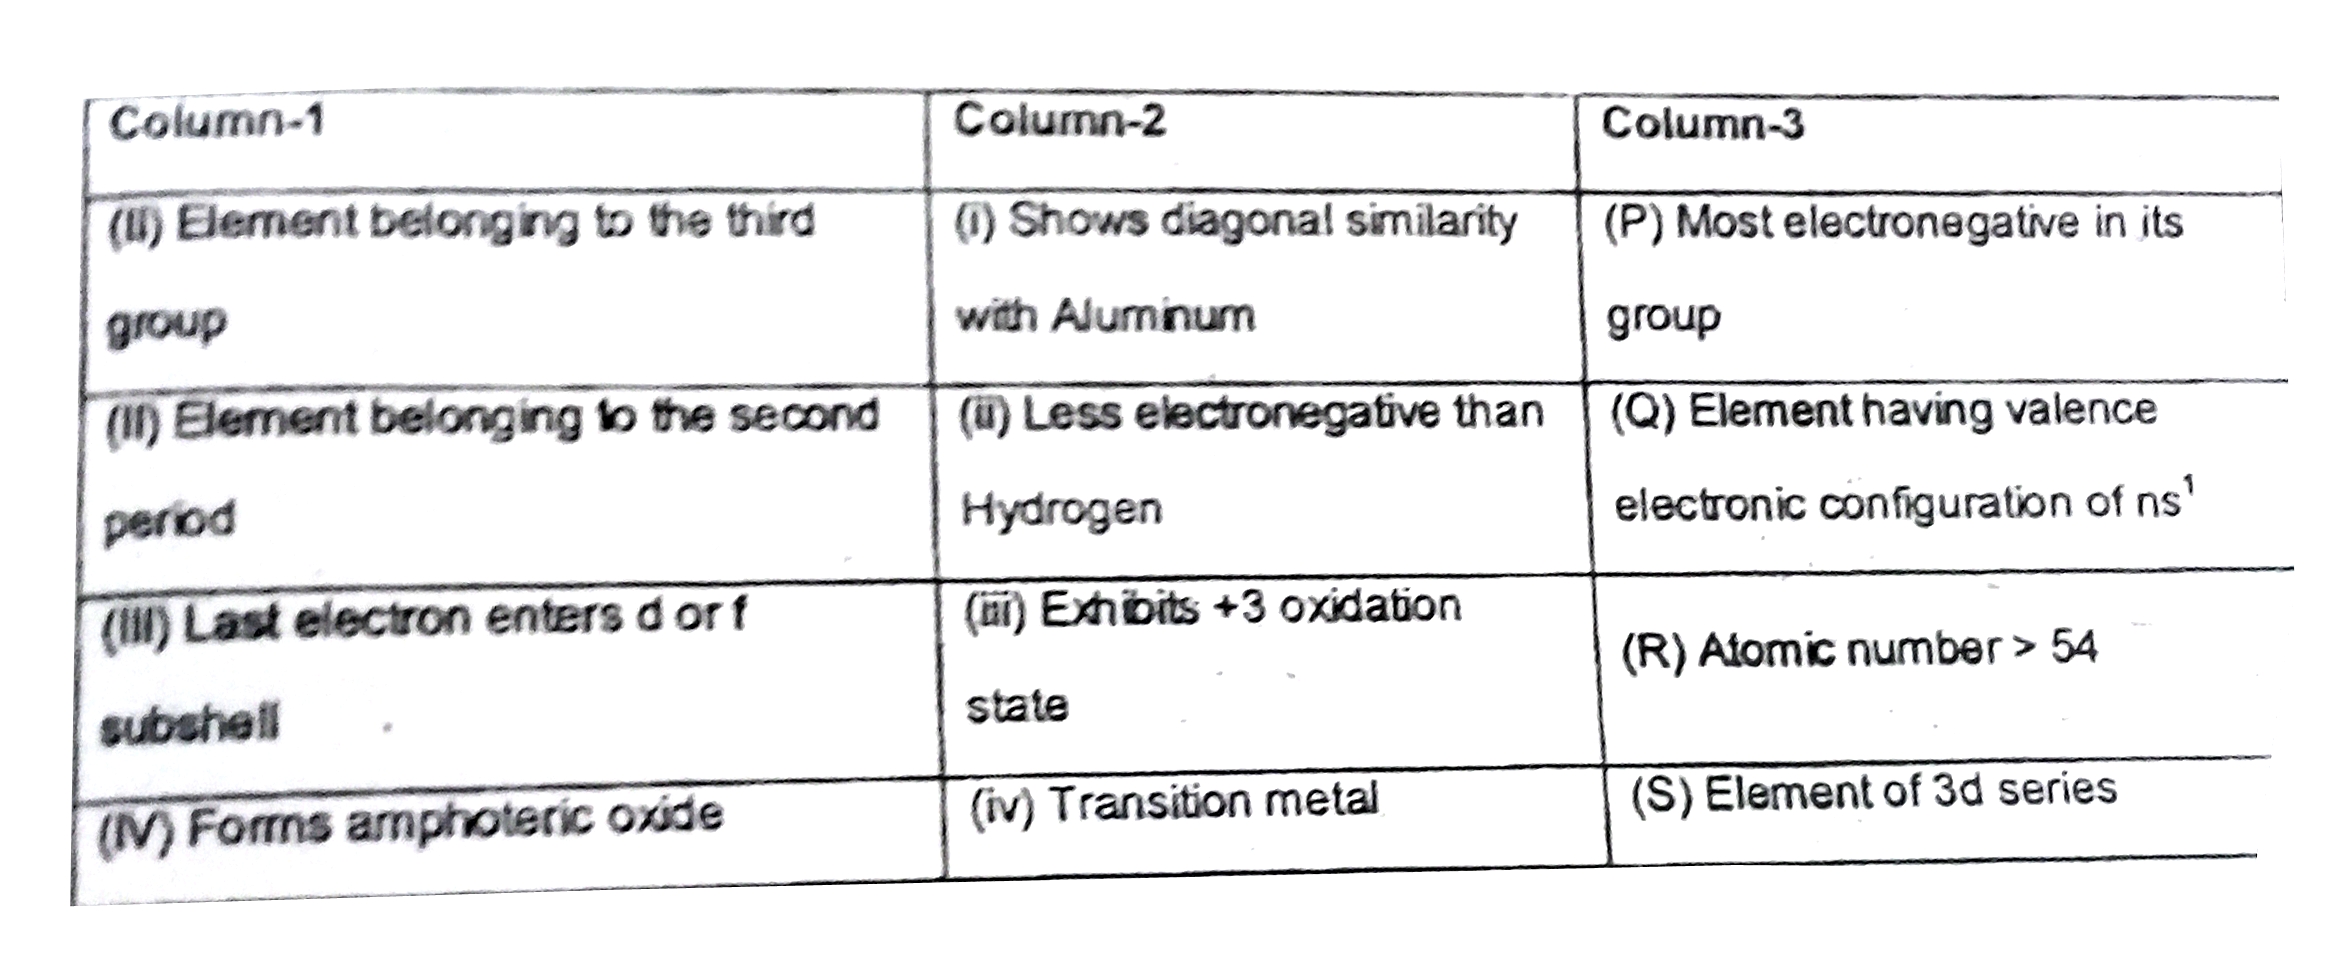 Modern peroidic table helps classify elements according to their similarities.Consider the columns mentioning certain details about elements with comments on their important features.   Answer the question that follow :      The appropriate combination for Lanthanum is :